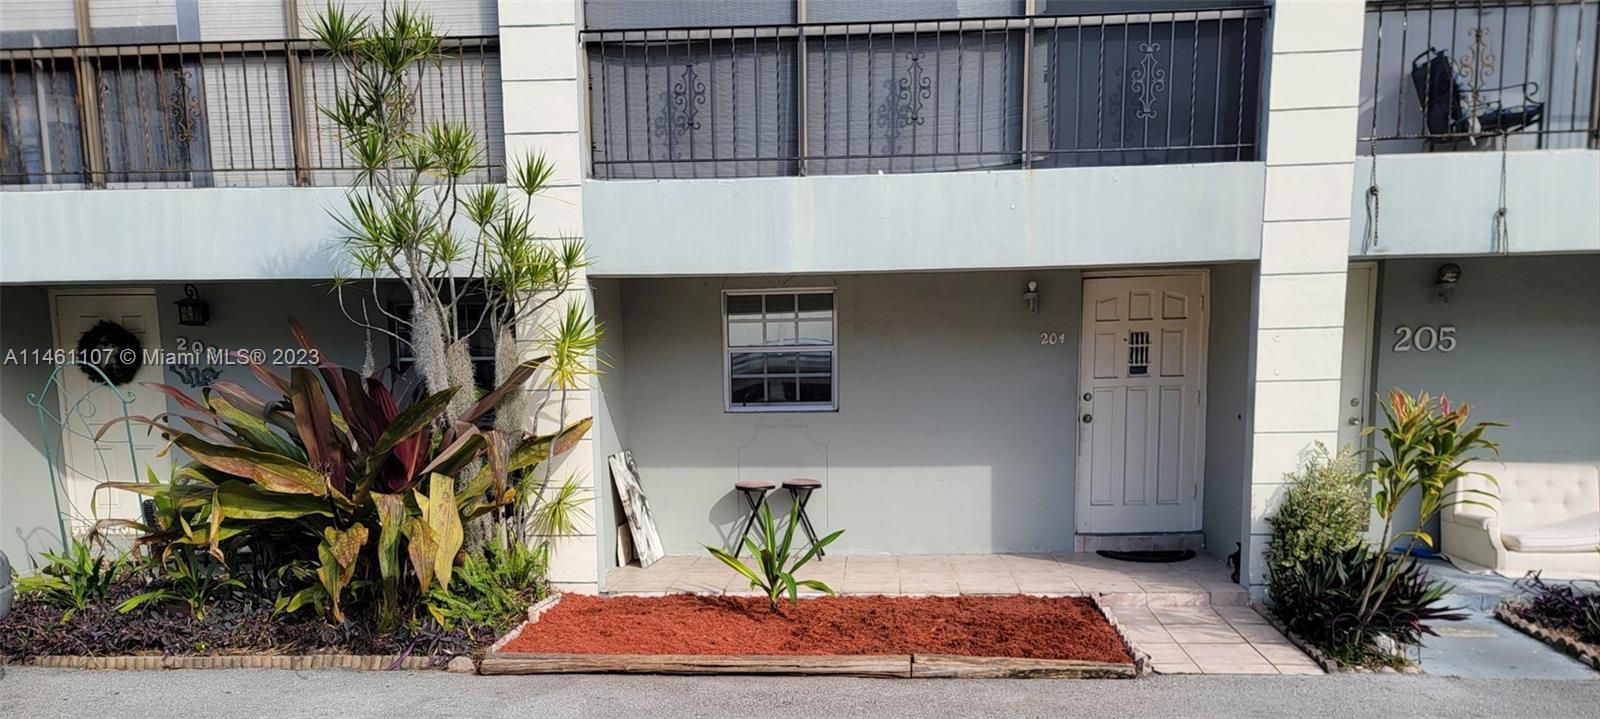 Location , Location a dream rental investment opportunity in a charming townhouse community.